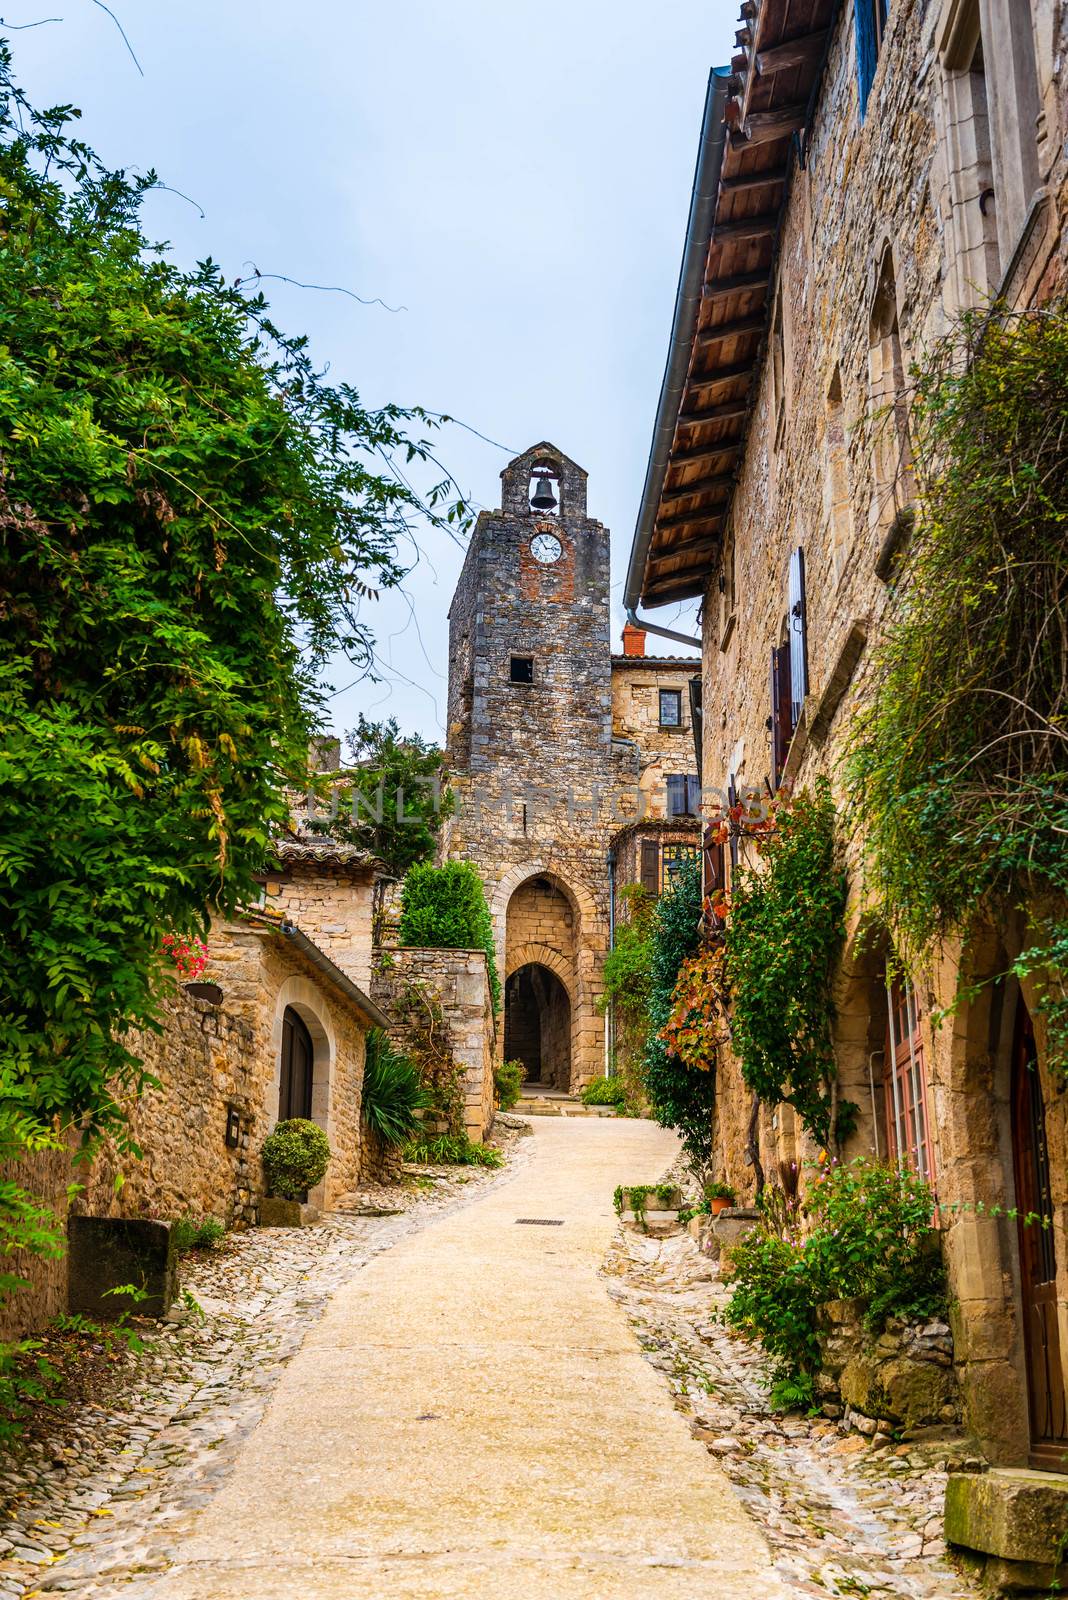 Magnificent medieval tourist village of Tarn-et-Garonne, is part of the list of the most beautiful villages in France. In the Occitanie region in the south of France